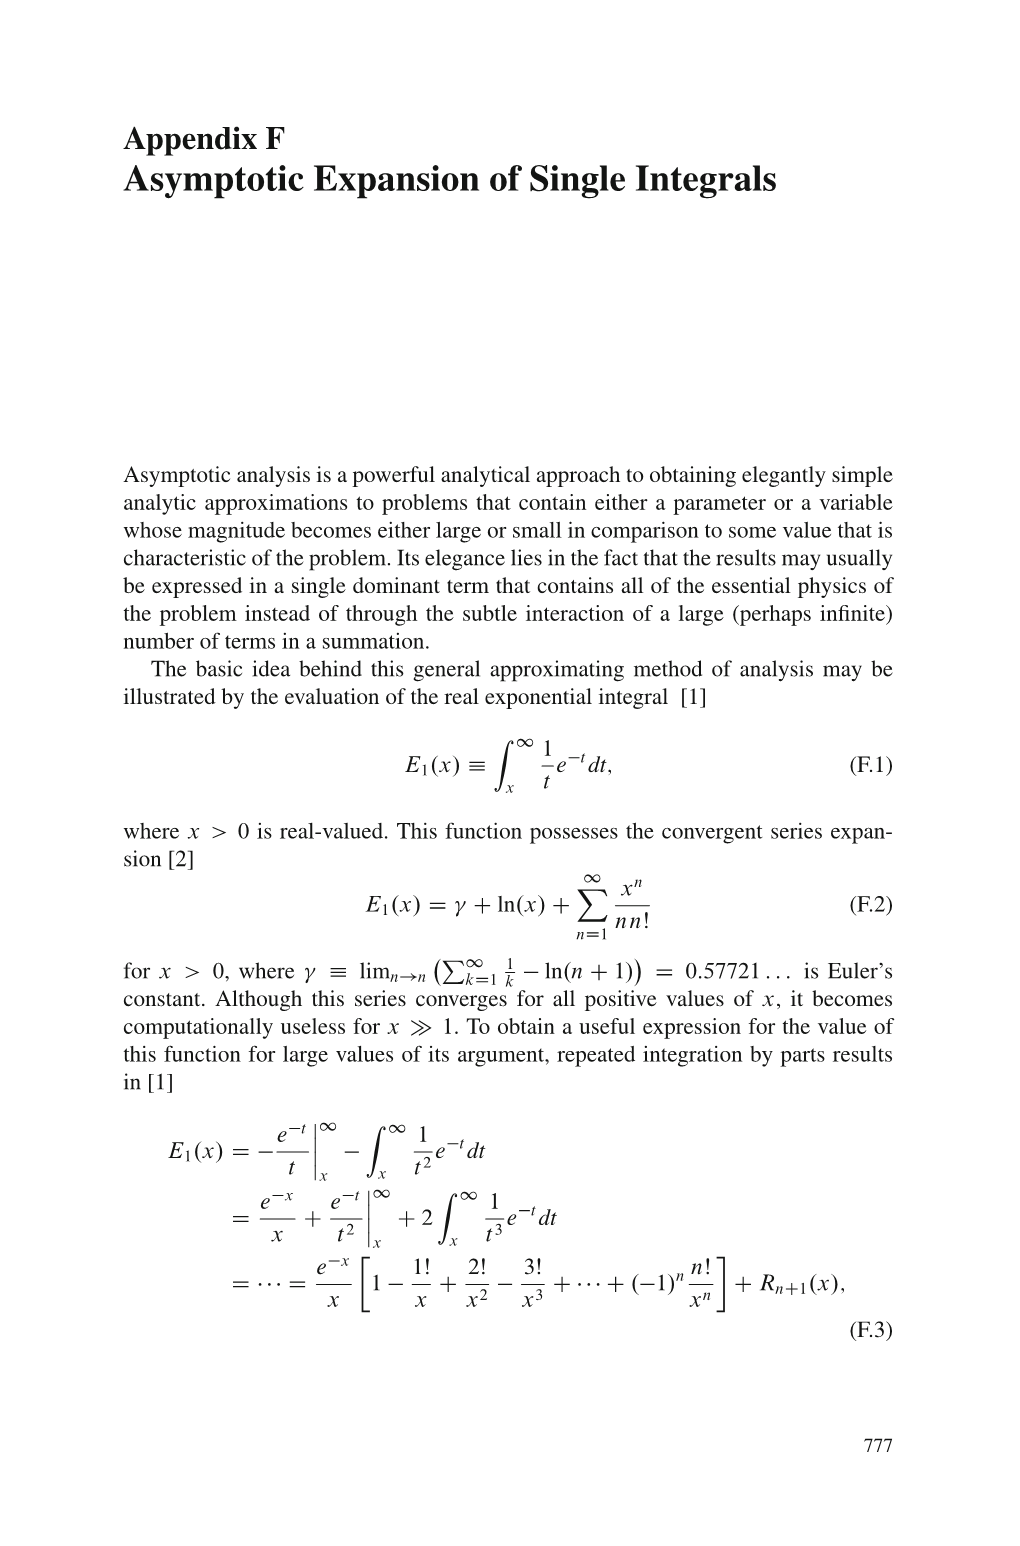 Asymptotic Expansion of Single Integrals